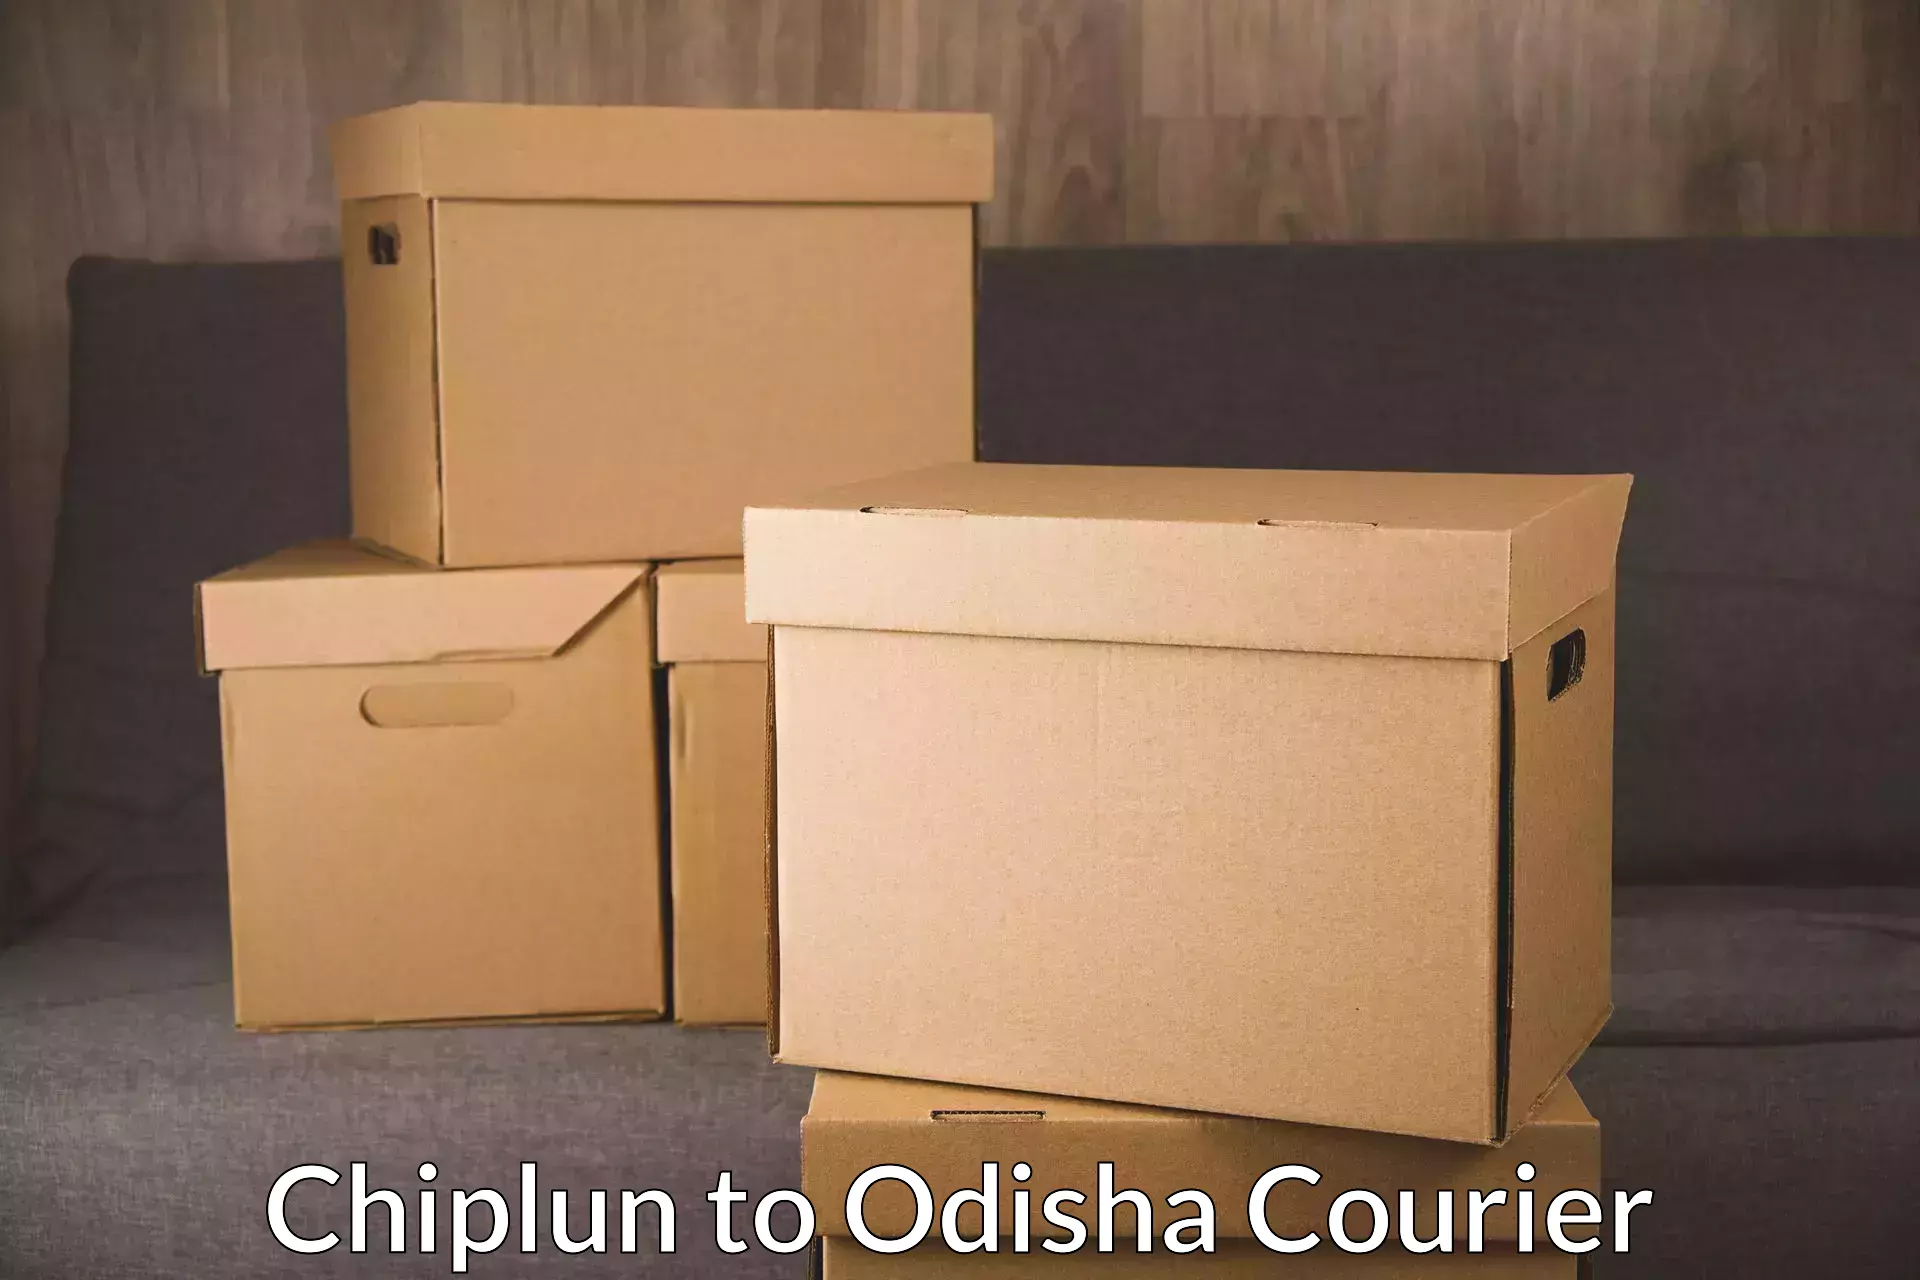 Reliable shipping partners Chiplun to Odisha